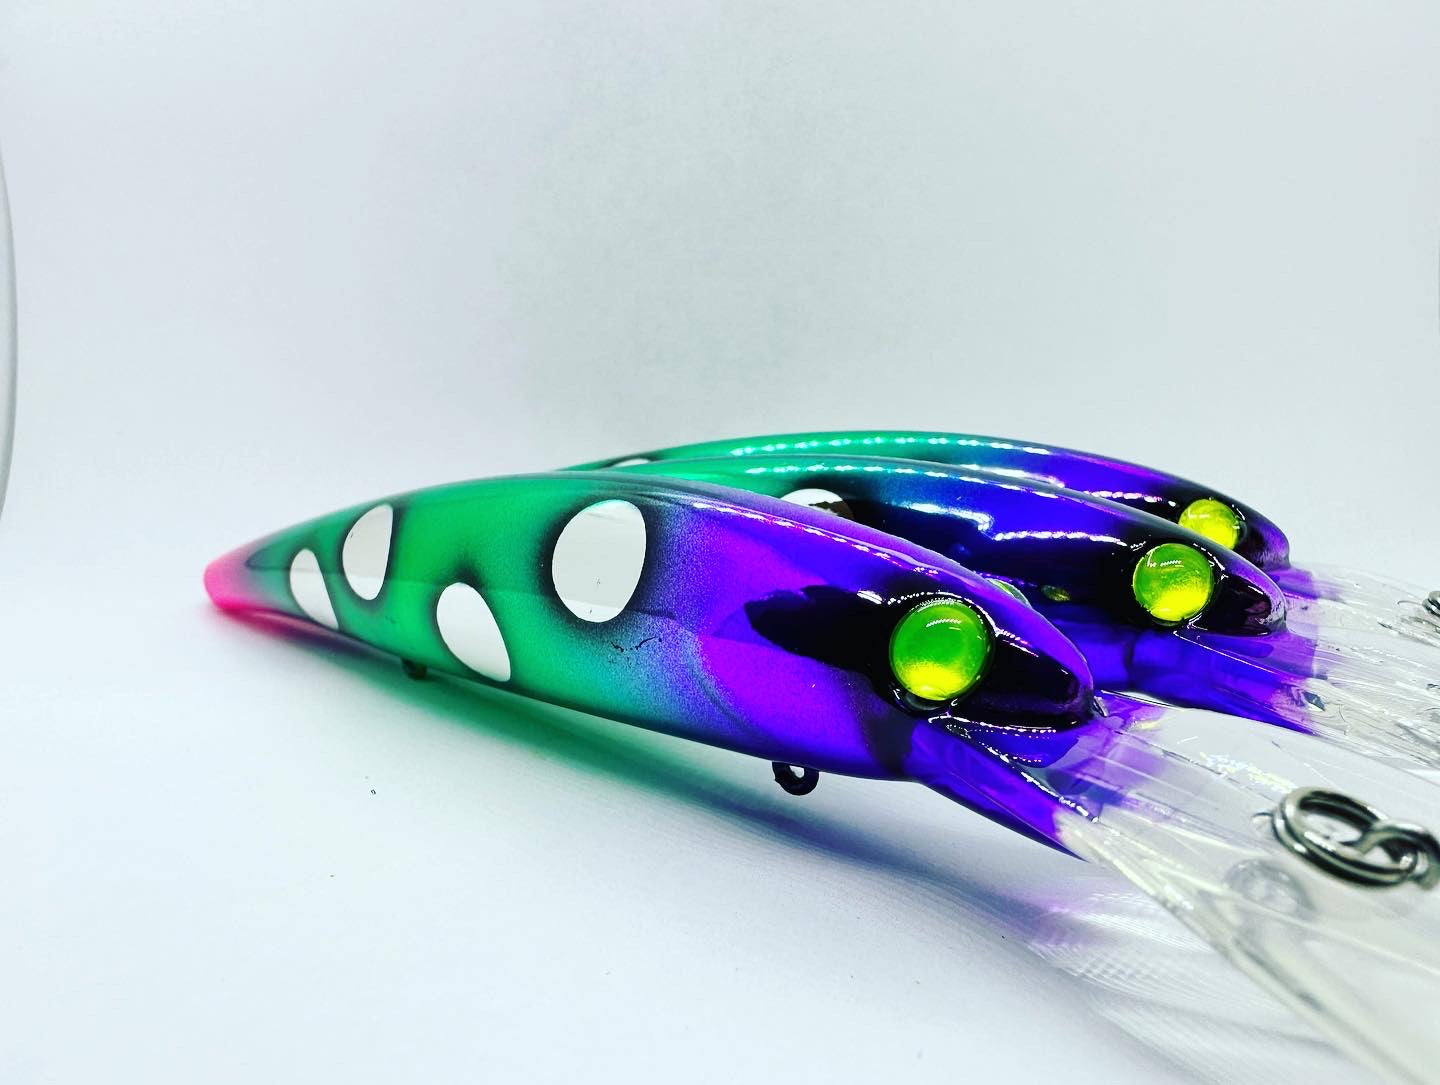 Custom Bandit Crankbait - Tropical Thunder by Vertical Jigs and Lures